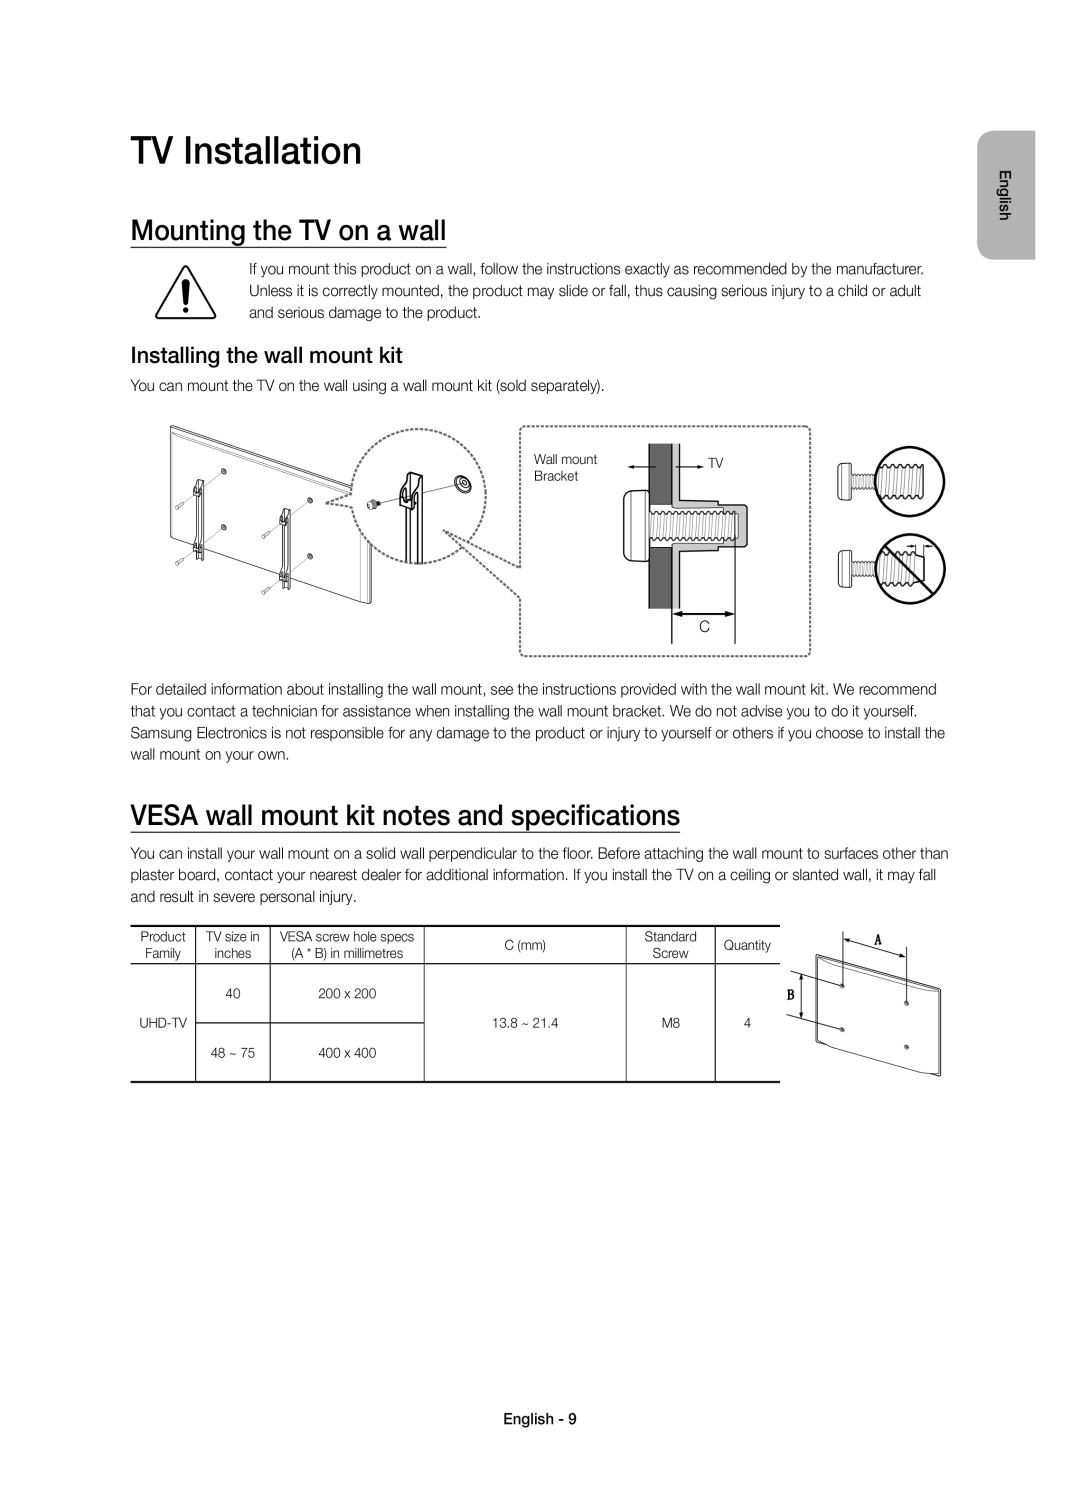 Samsung UE55JU6400KXZF manual TV Installation, Mounting the TV on a wall, VESA wall mount kit notes and specifications 